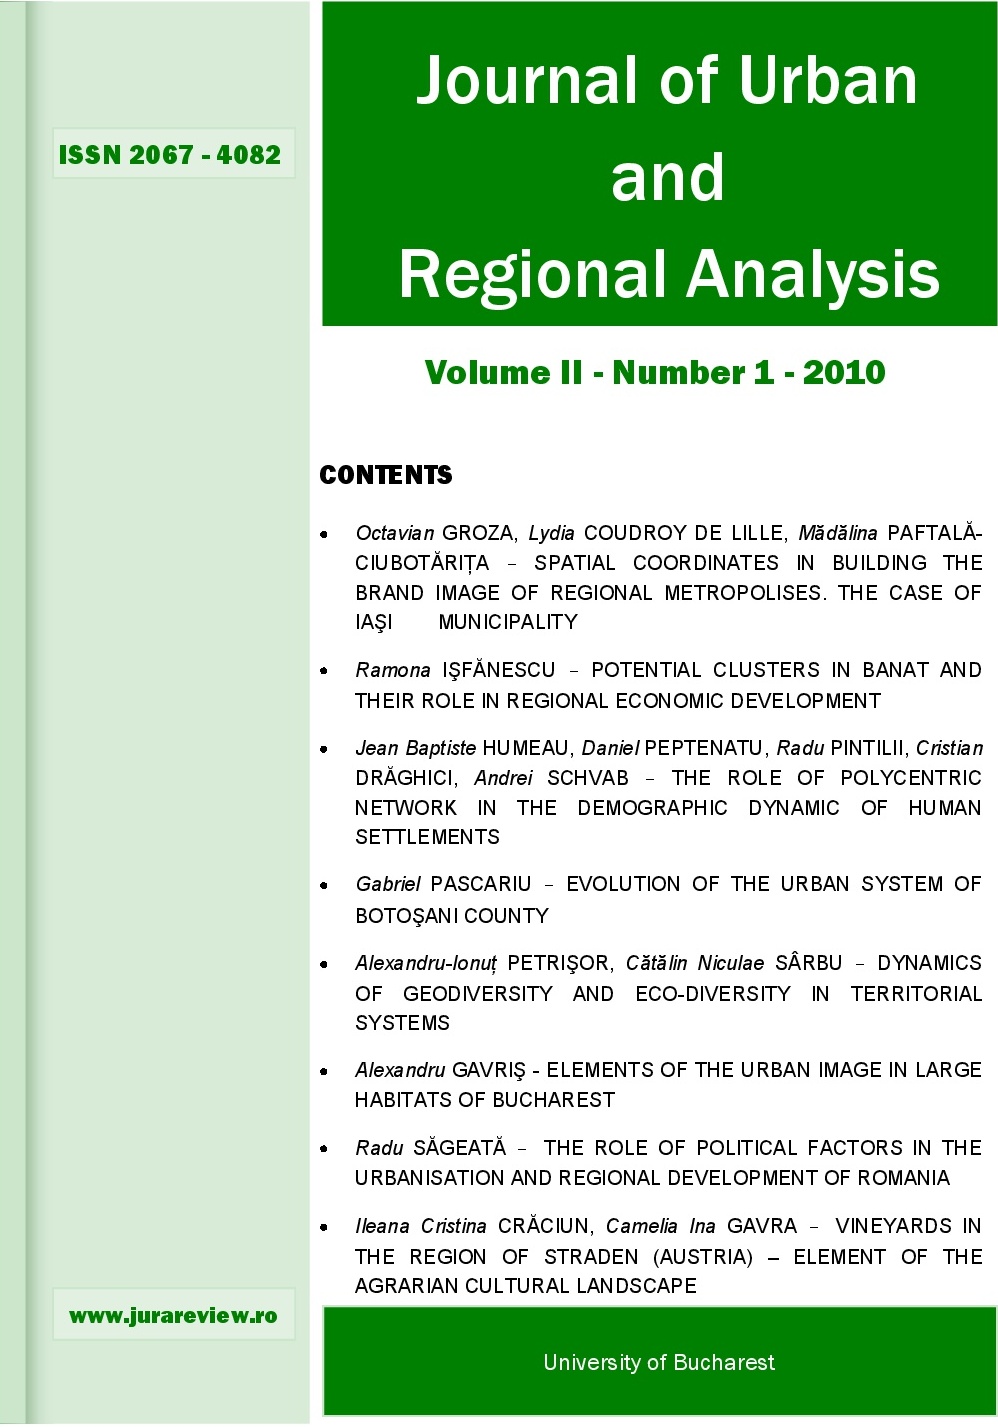 POTENTIAL CLUSTERS IN BANAT AND THEIR ROLE IN REGIONAL ECONOMIC DEVELOPMENT Cover Image